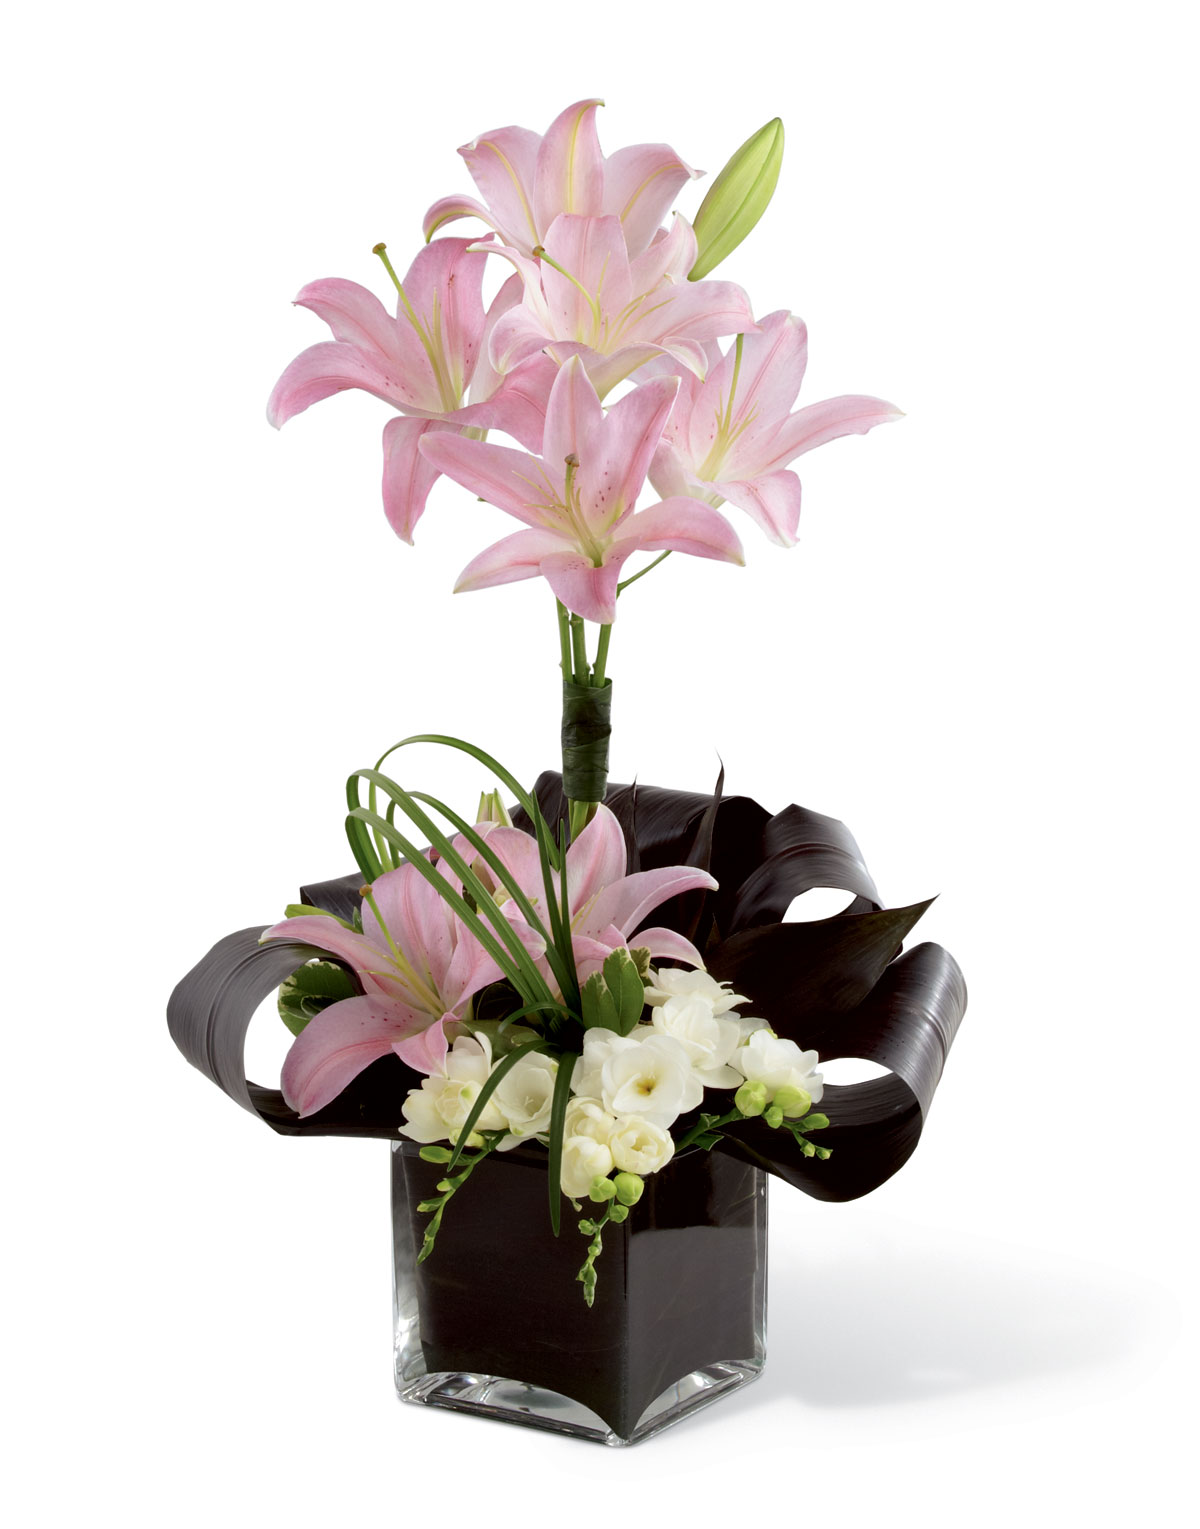 Lily Topiary | Summerlin Florist & Gifts